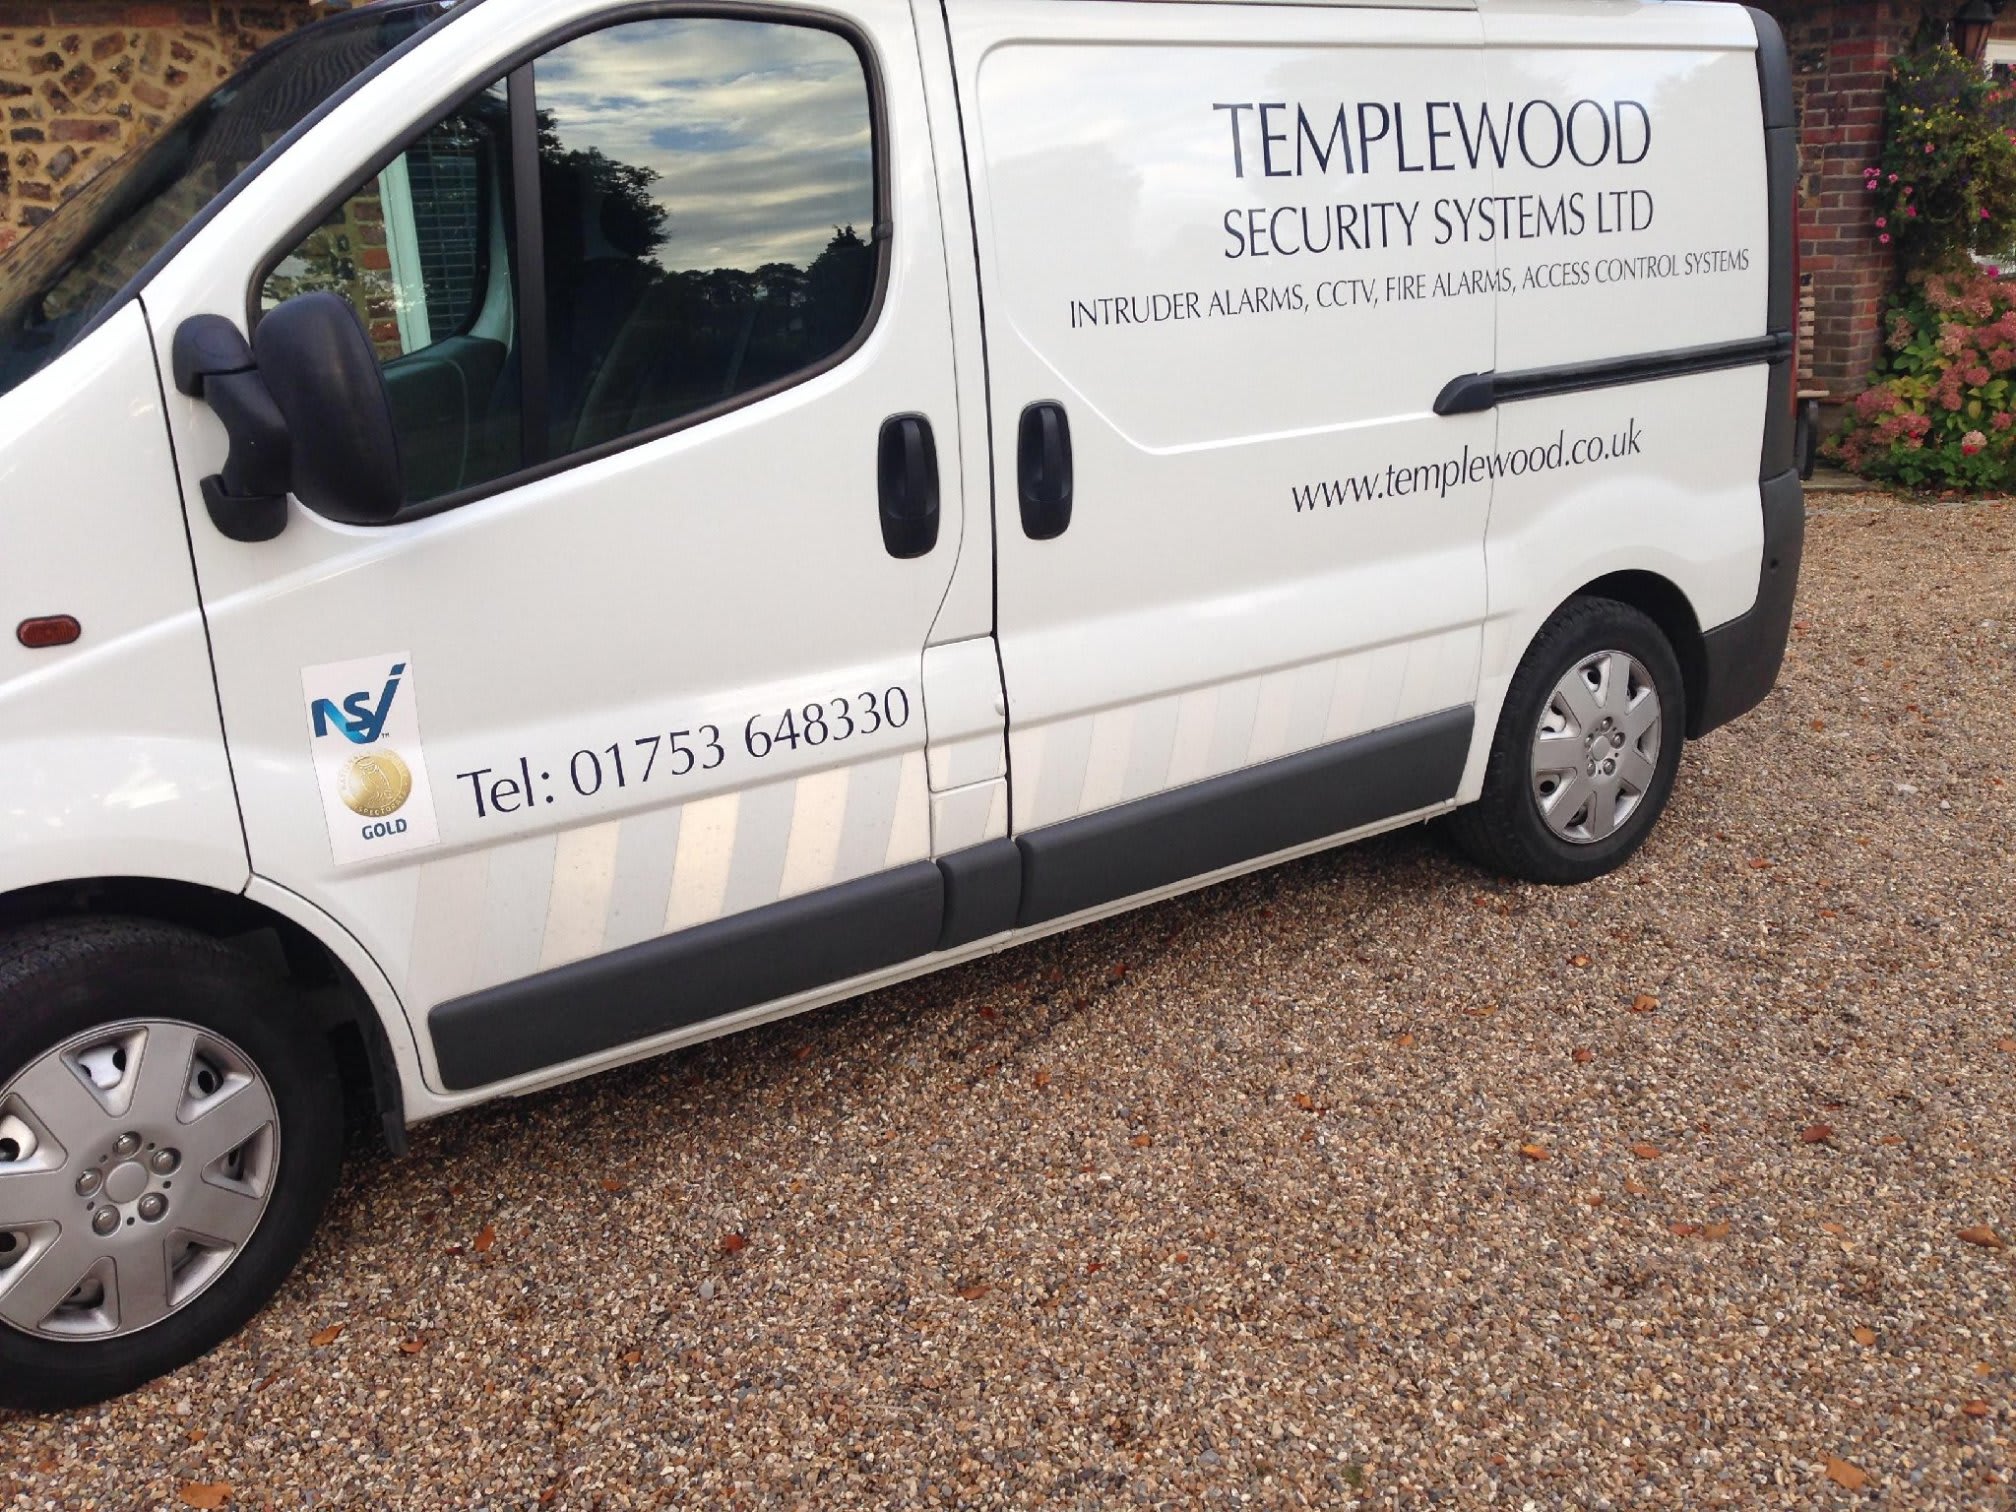 Templewood Security Systems Ltd Slough 01753 648330